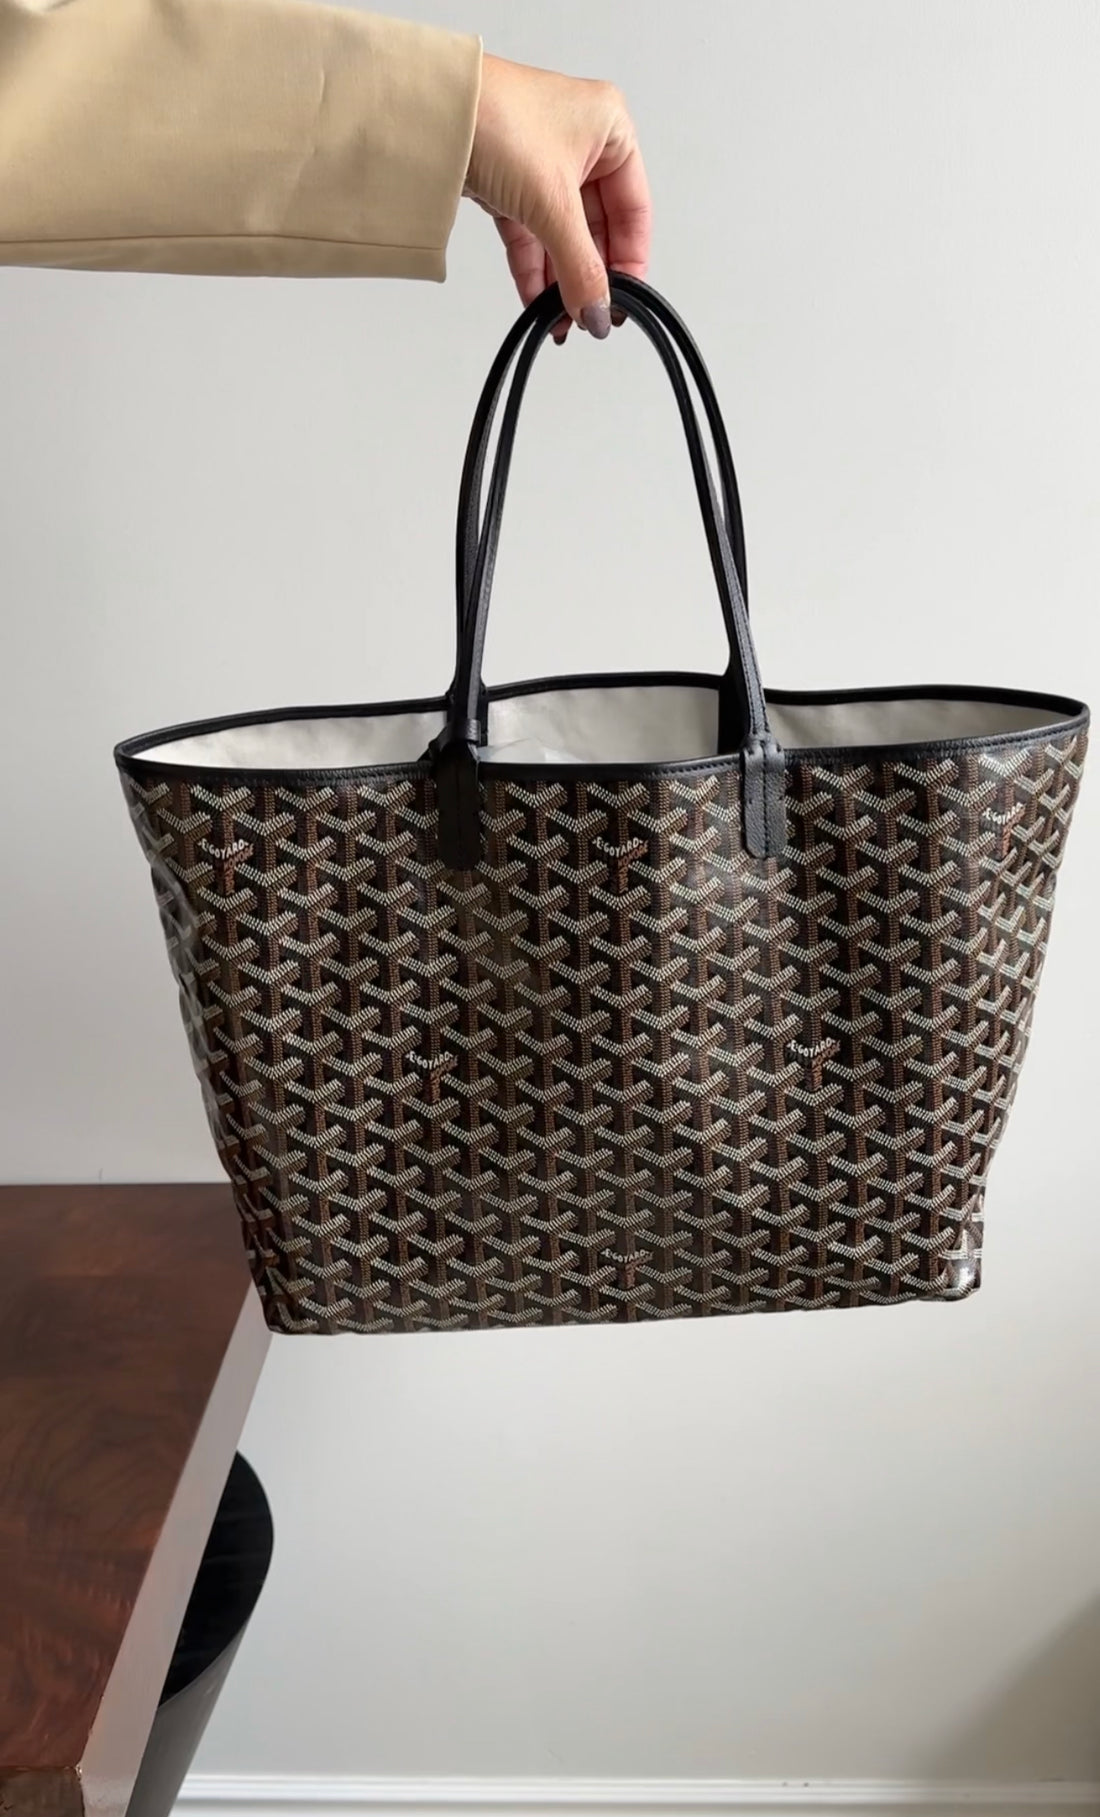 Goyard Black and Brown Coated Canvas St Louis Tote Bag PM